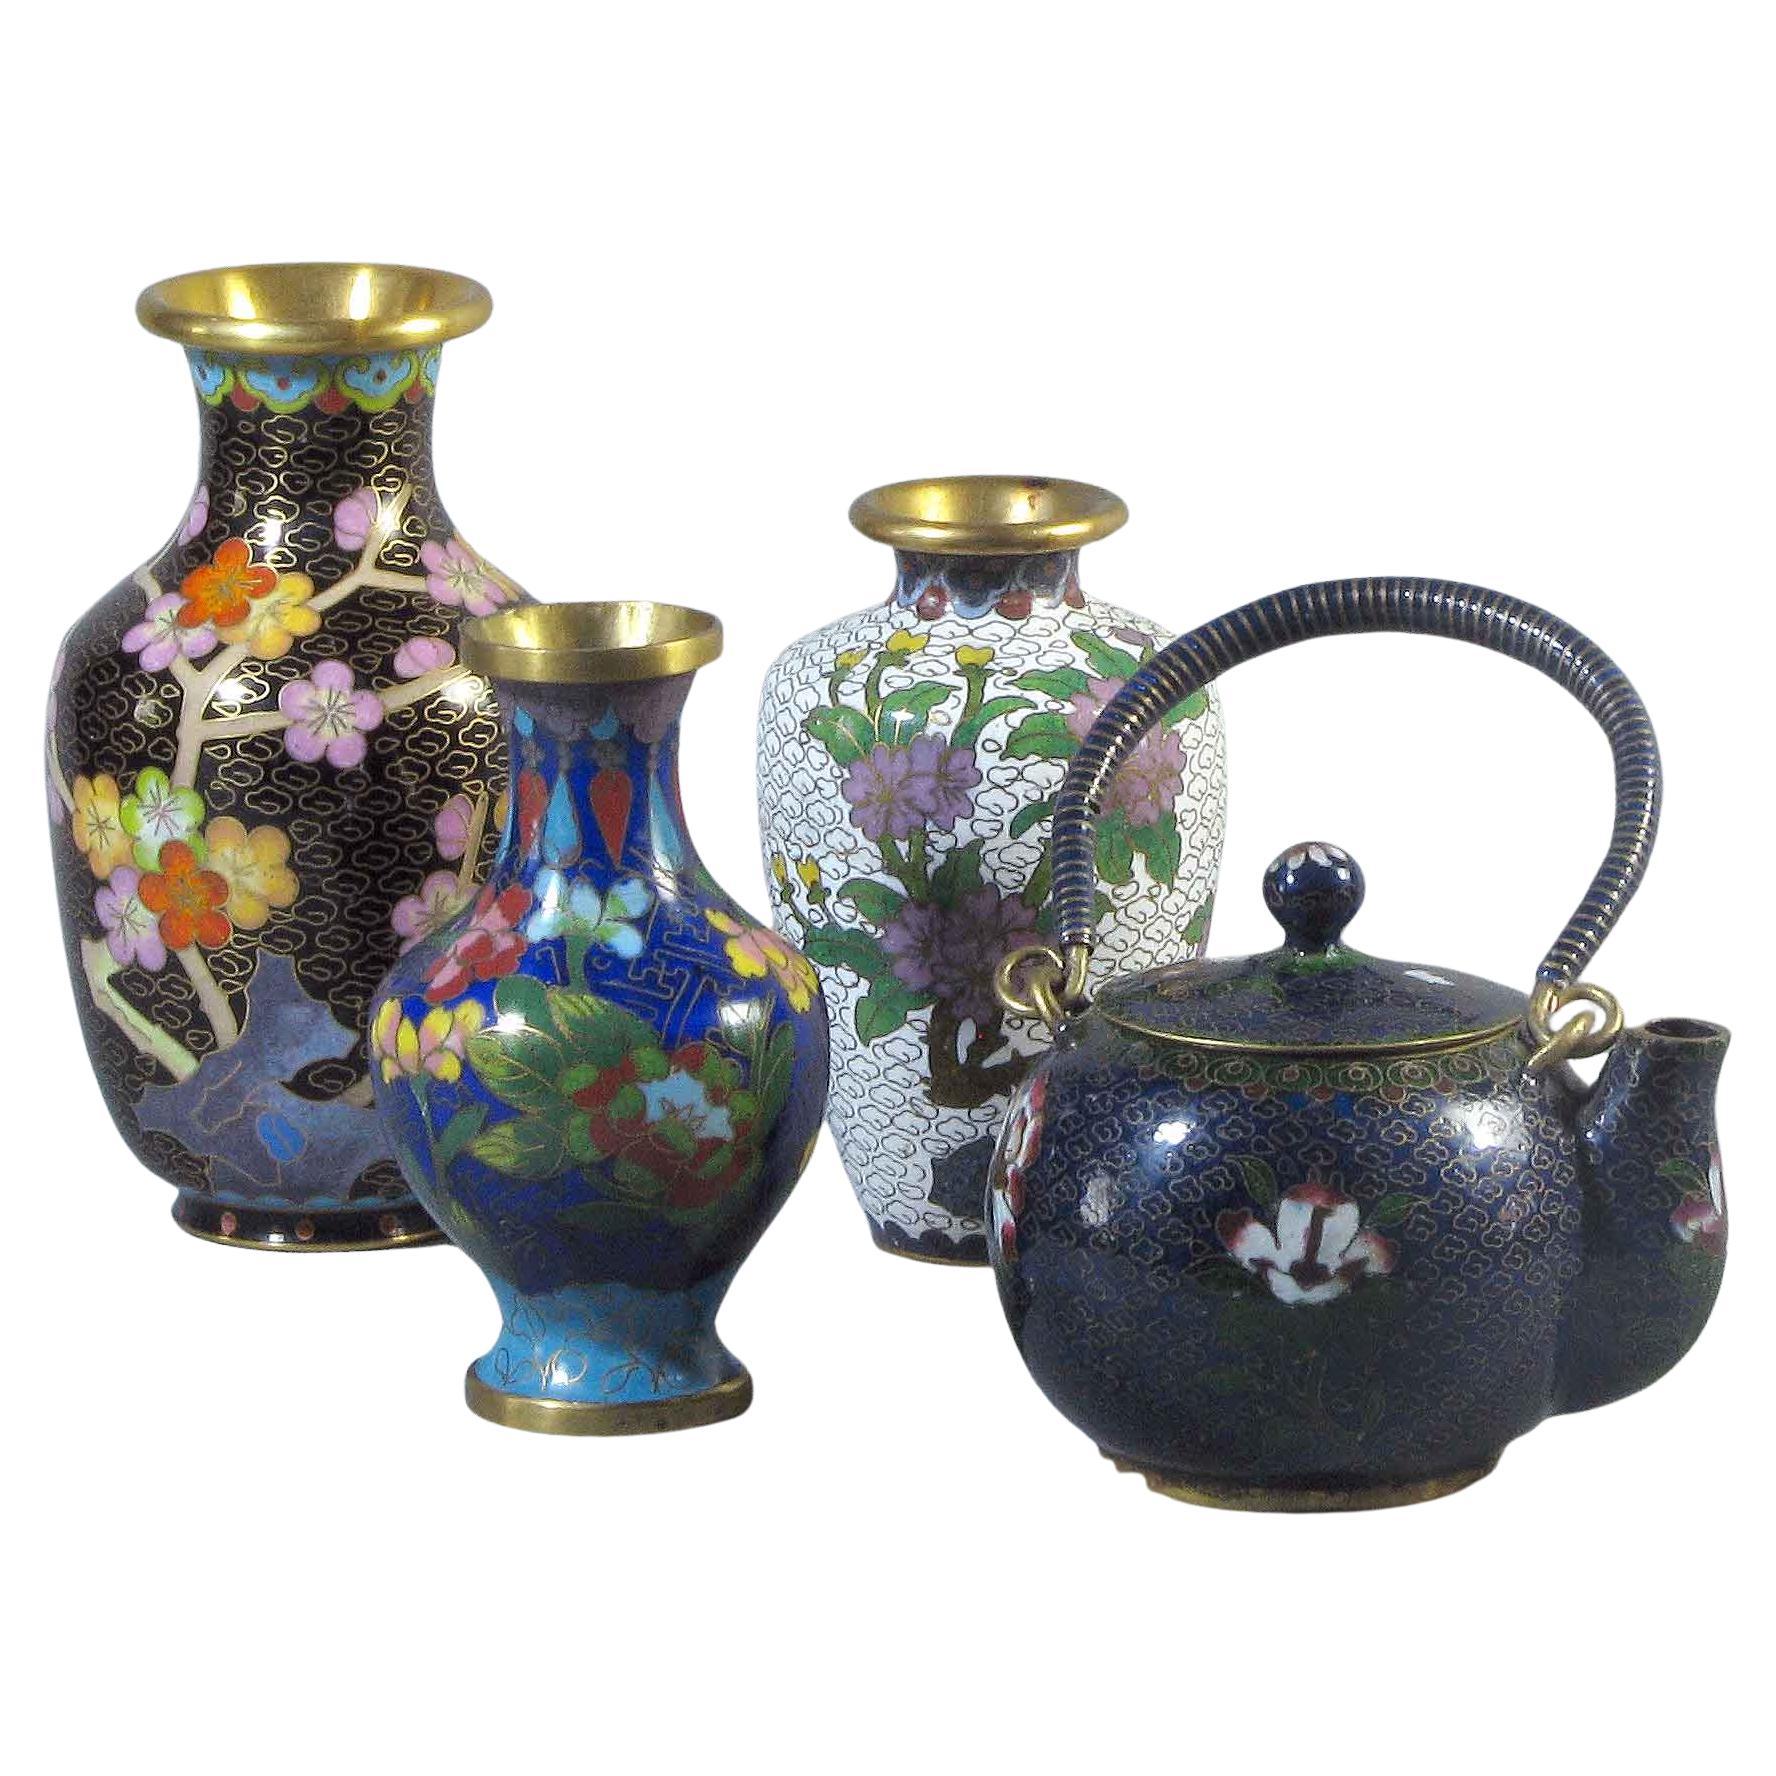 Lot of Four Chinese Cloisonne Vases & Teapot, 20th Century